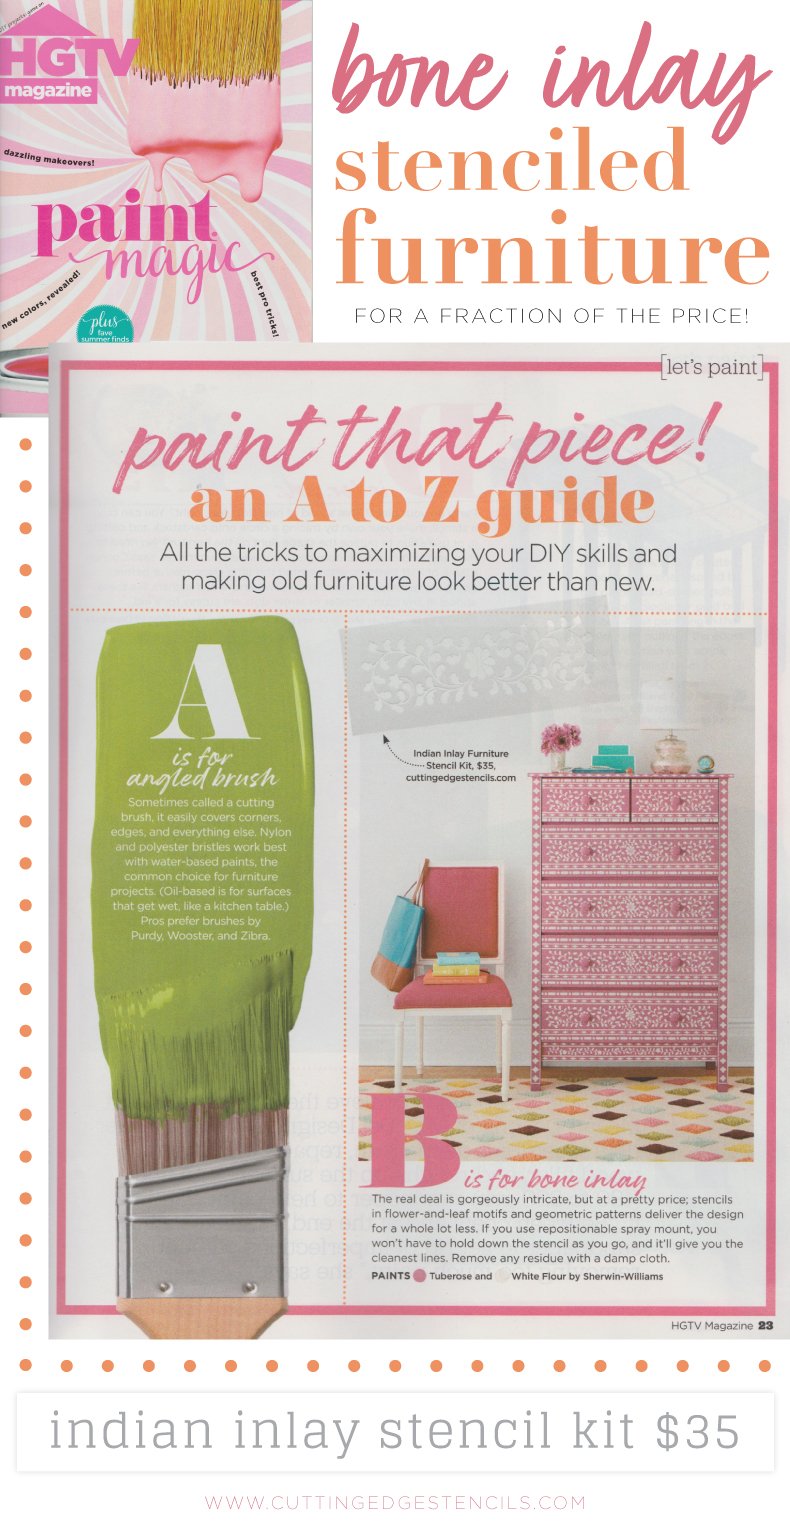 HGTV Magazine Features Indian Inlay Stenciled Furniture